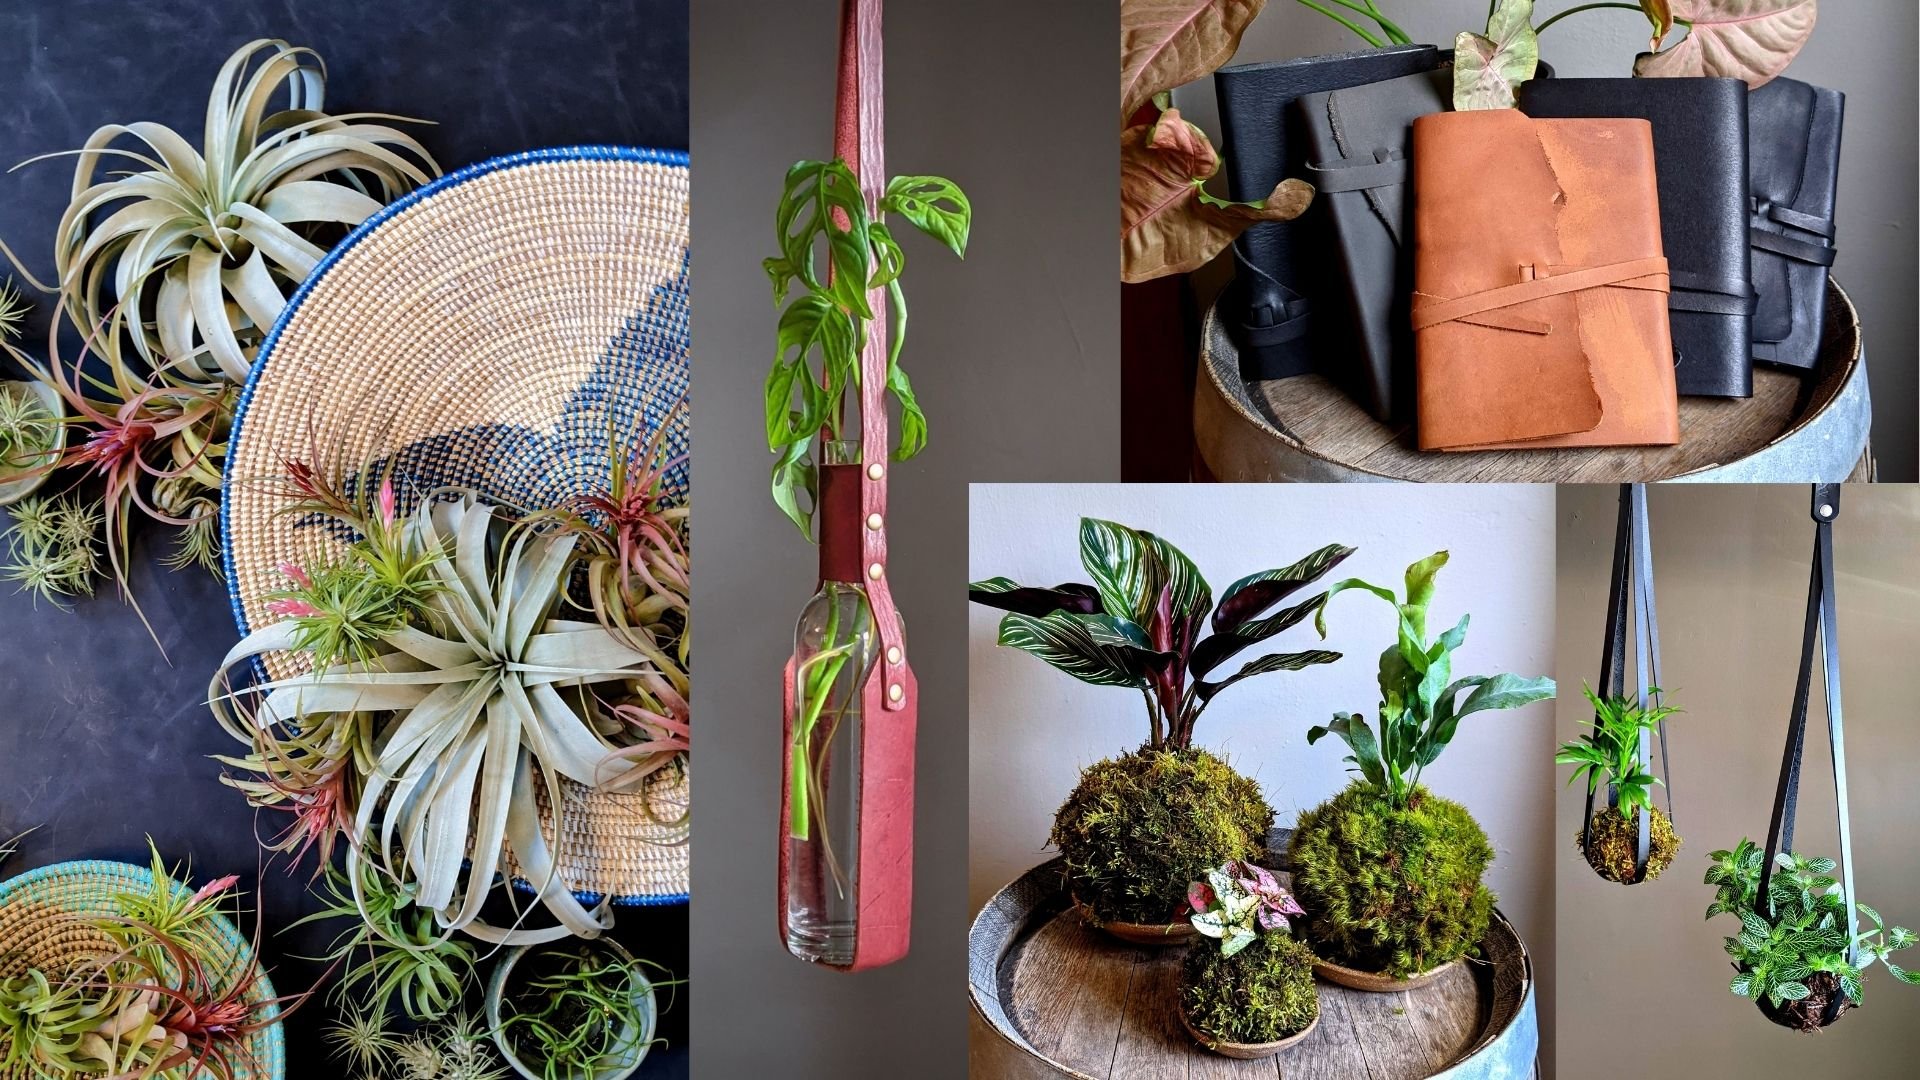 Product collage: air plants, handcrafted leather hanging vase, handcrafted leather journal, kokedama (moss balls).